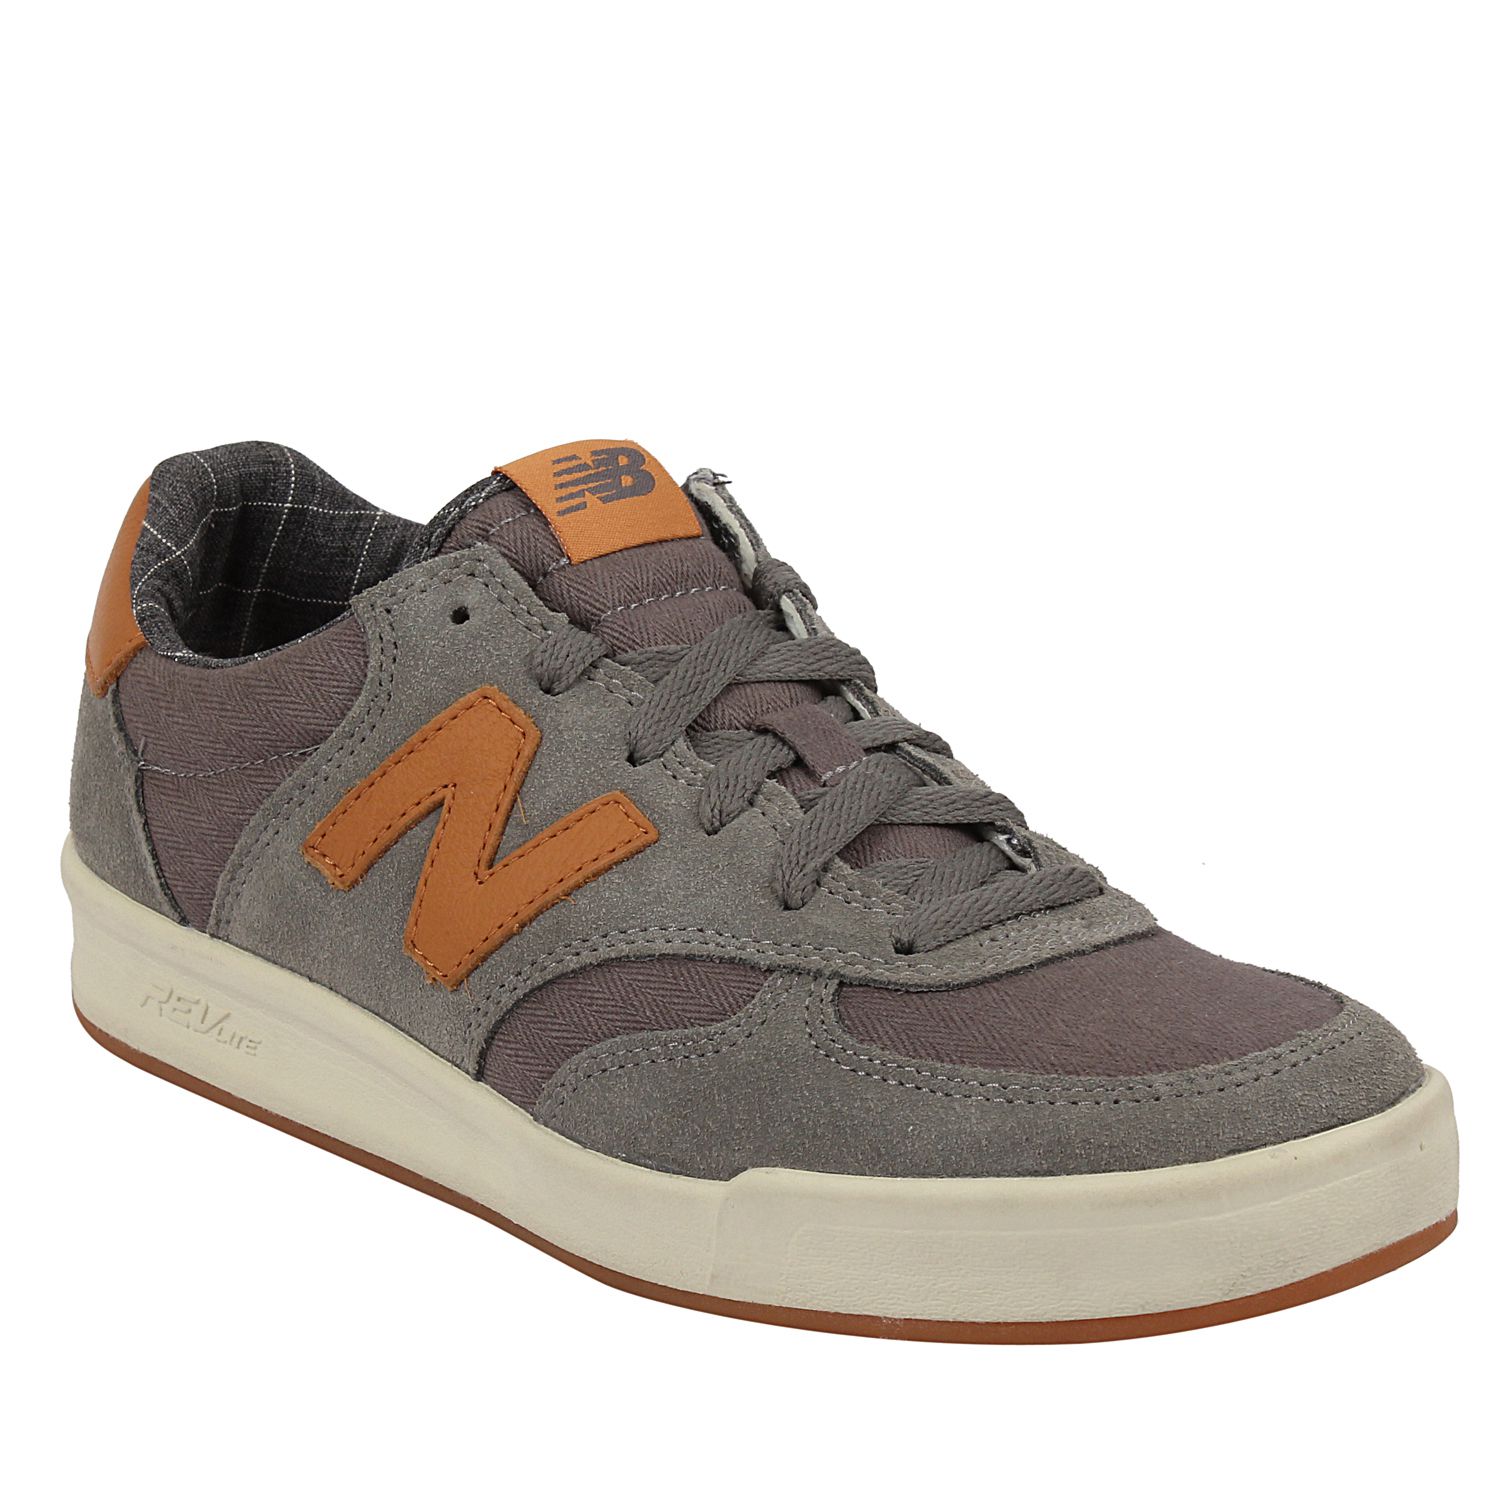 New Balance CRT300RB Sneakers Gray Casual Shoes - Buy New Balance ...